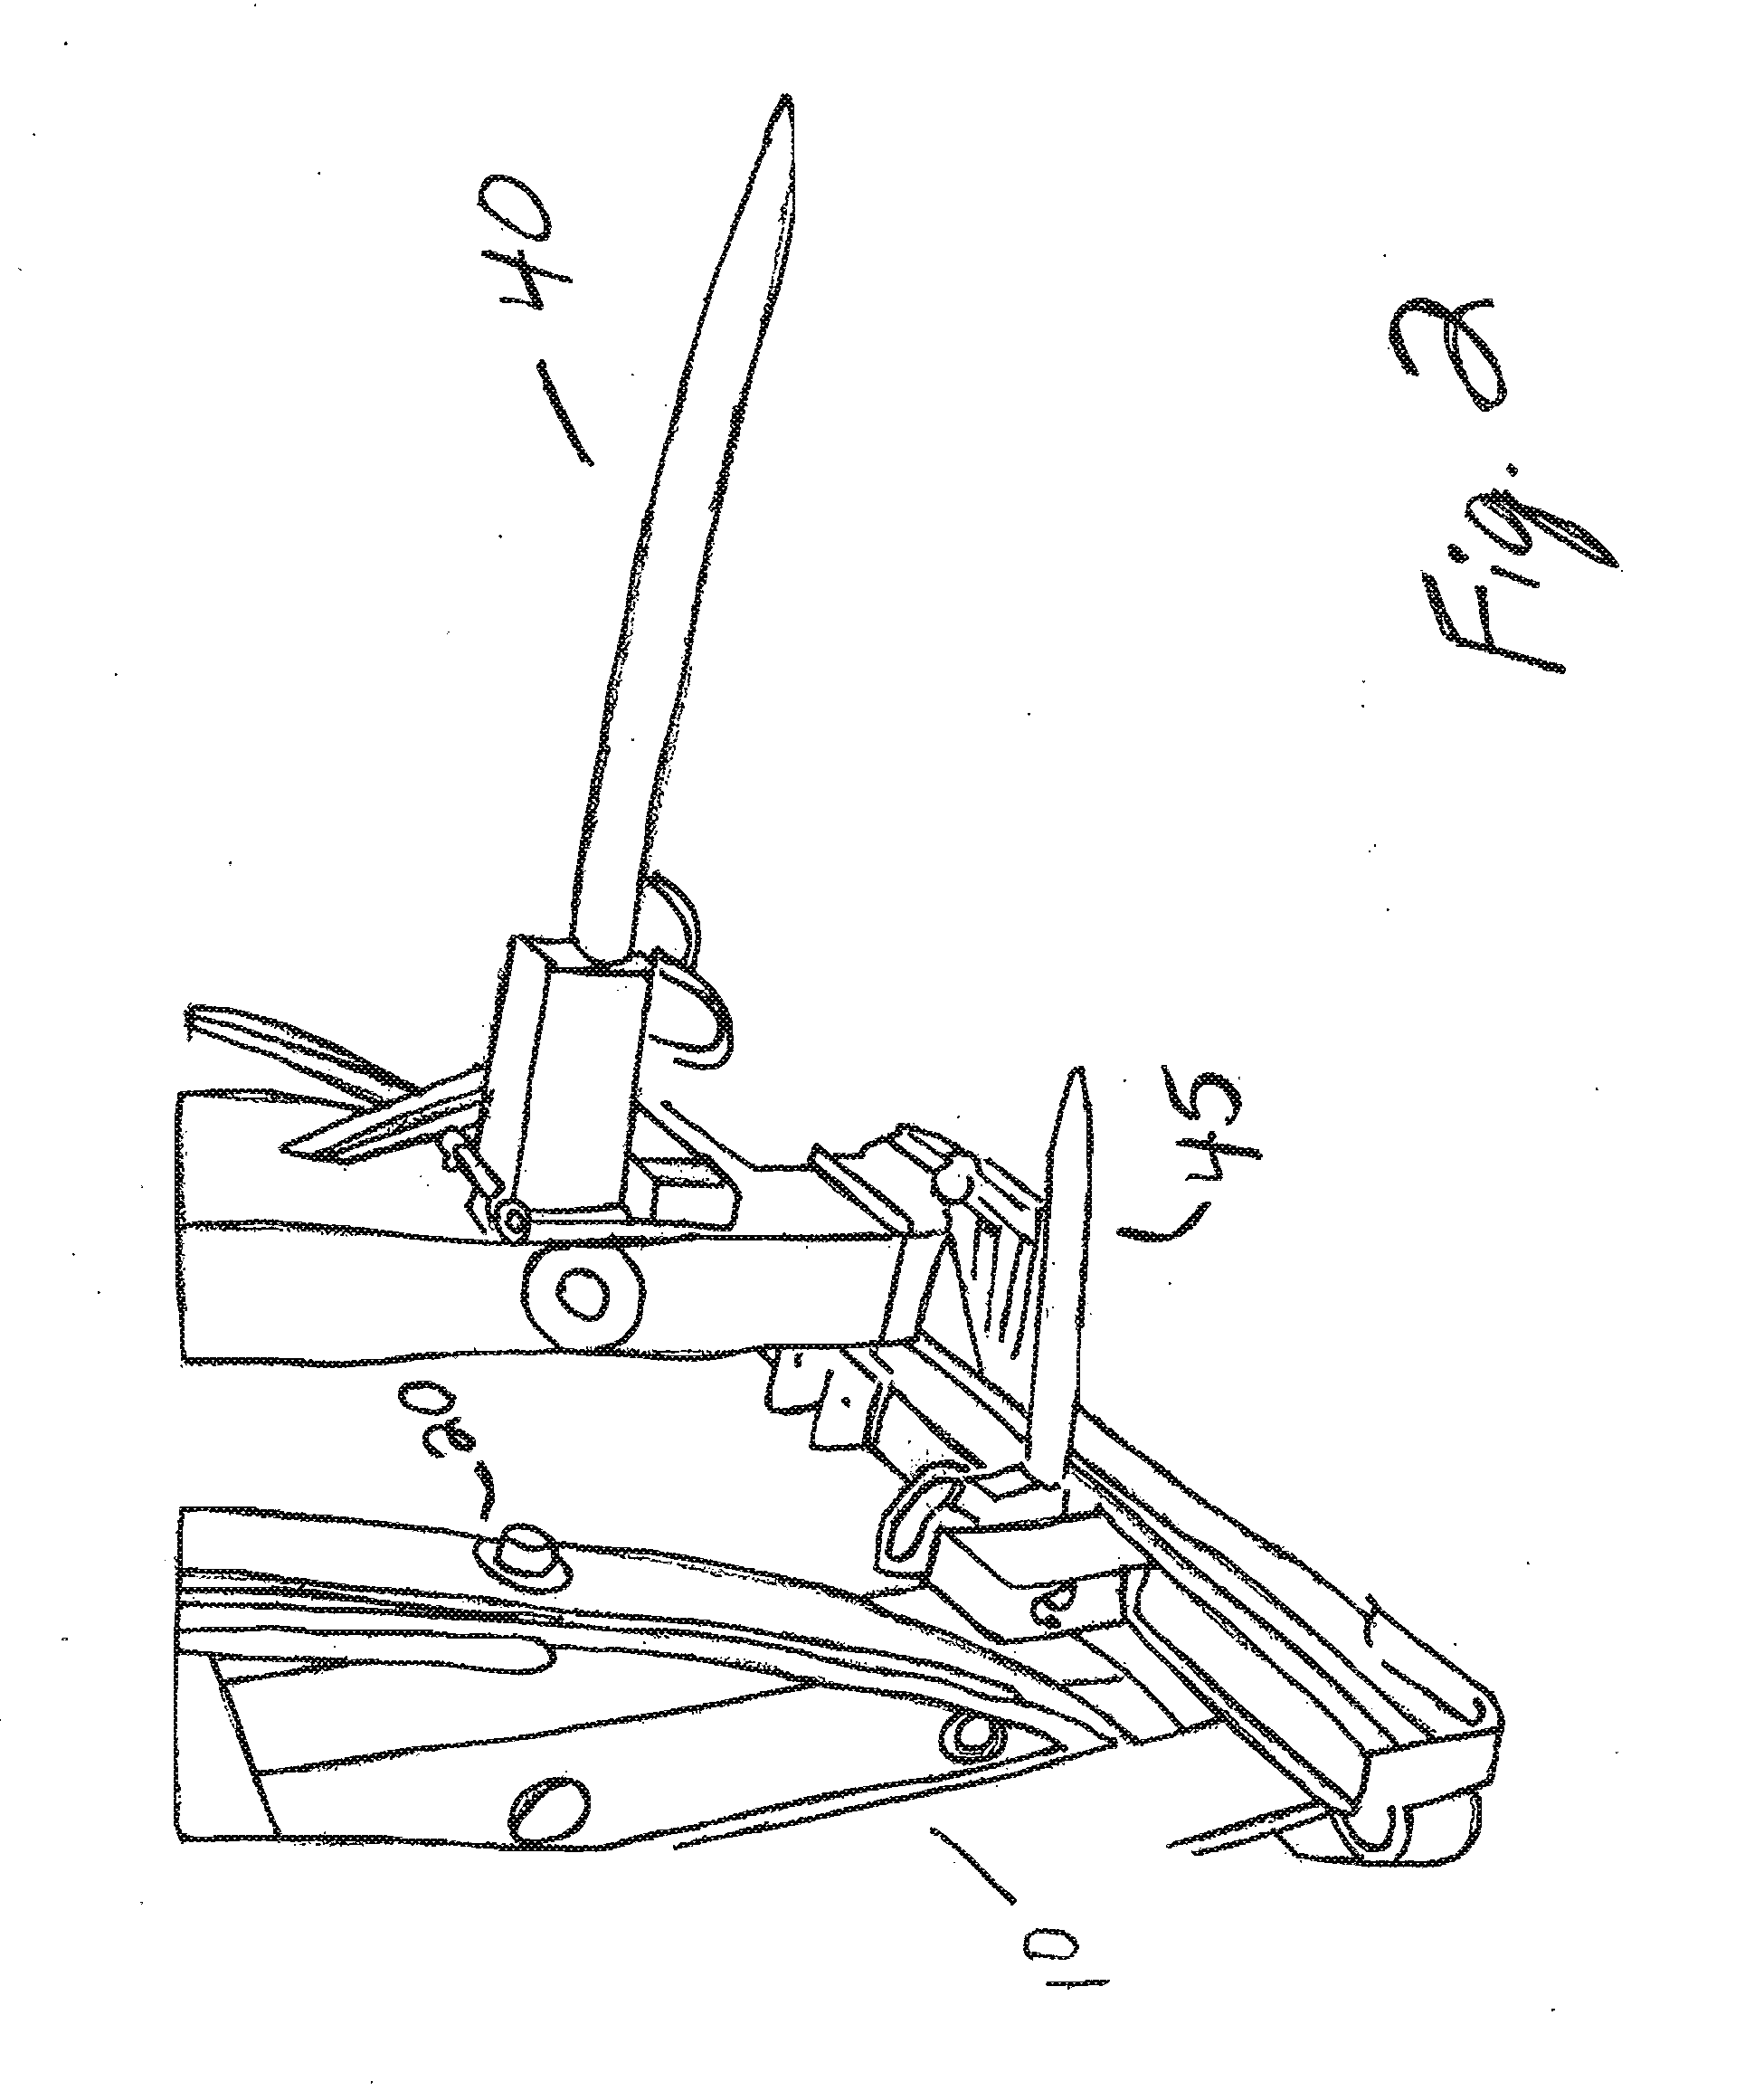 Adjustable tractor attachment for moving hay bales